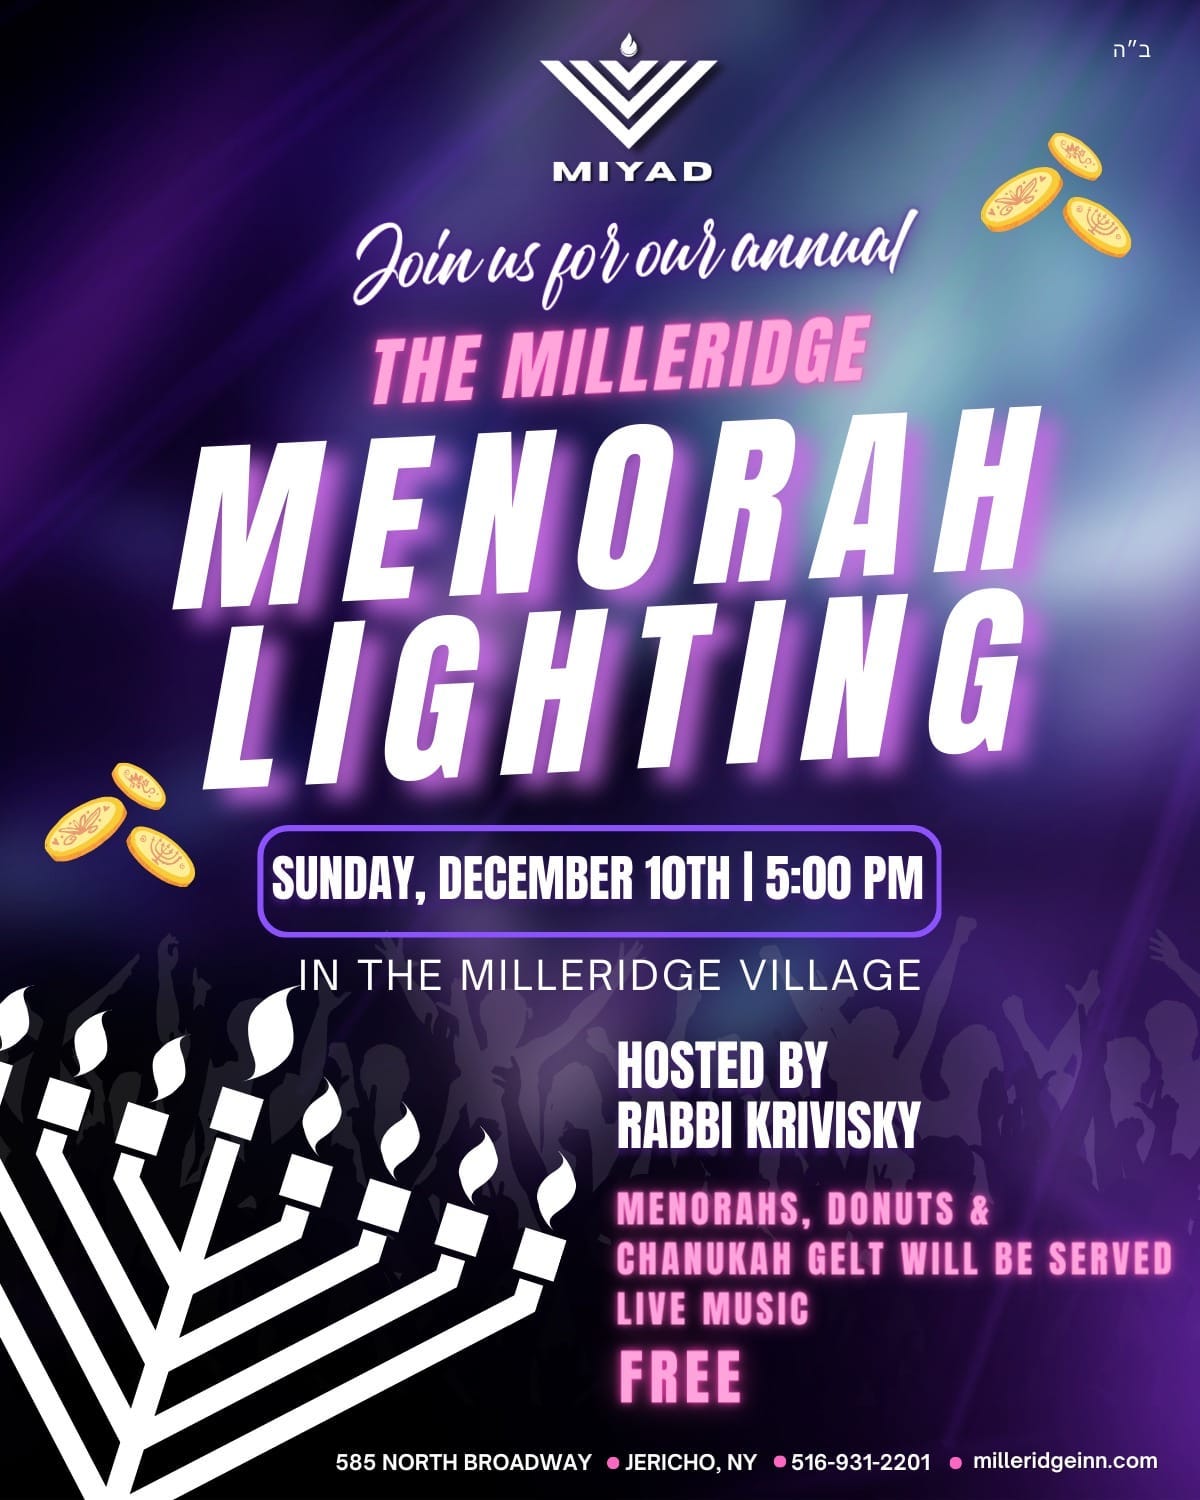 May be an image of candle holder and text that says 'ුත്ত MIYAD Joinus for our annual THE MILLERIDGE MENORAH LIGHTING SUNDAY, DECEMBER 10TH 5:00 PM IN THE MILLERIDGE VILLAGE HOSTED BY RABBI KRIVISKY MENORAHS, DONUTS & CHANUKAH GELT WILL BE SERVED LIVE MUSIC FREE 585 NORTH BROADWAY JERICHO, NY 516-931-2201 milleridgeinn.com'